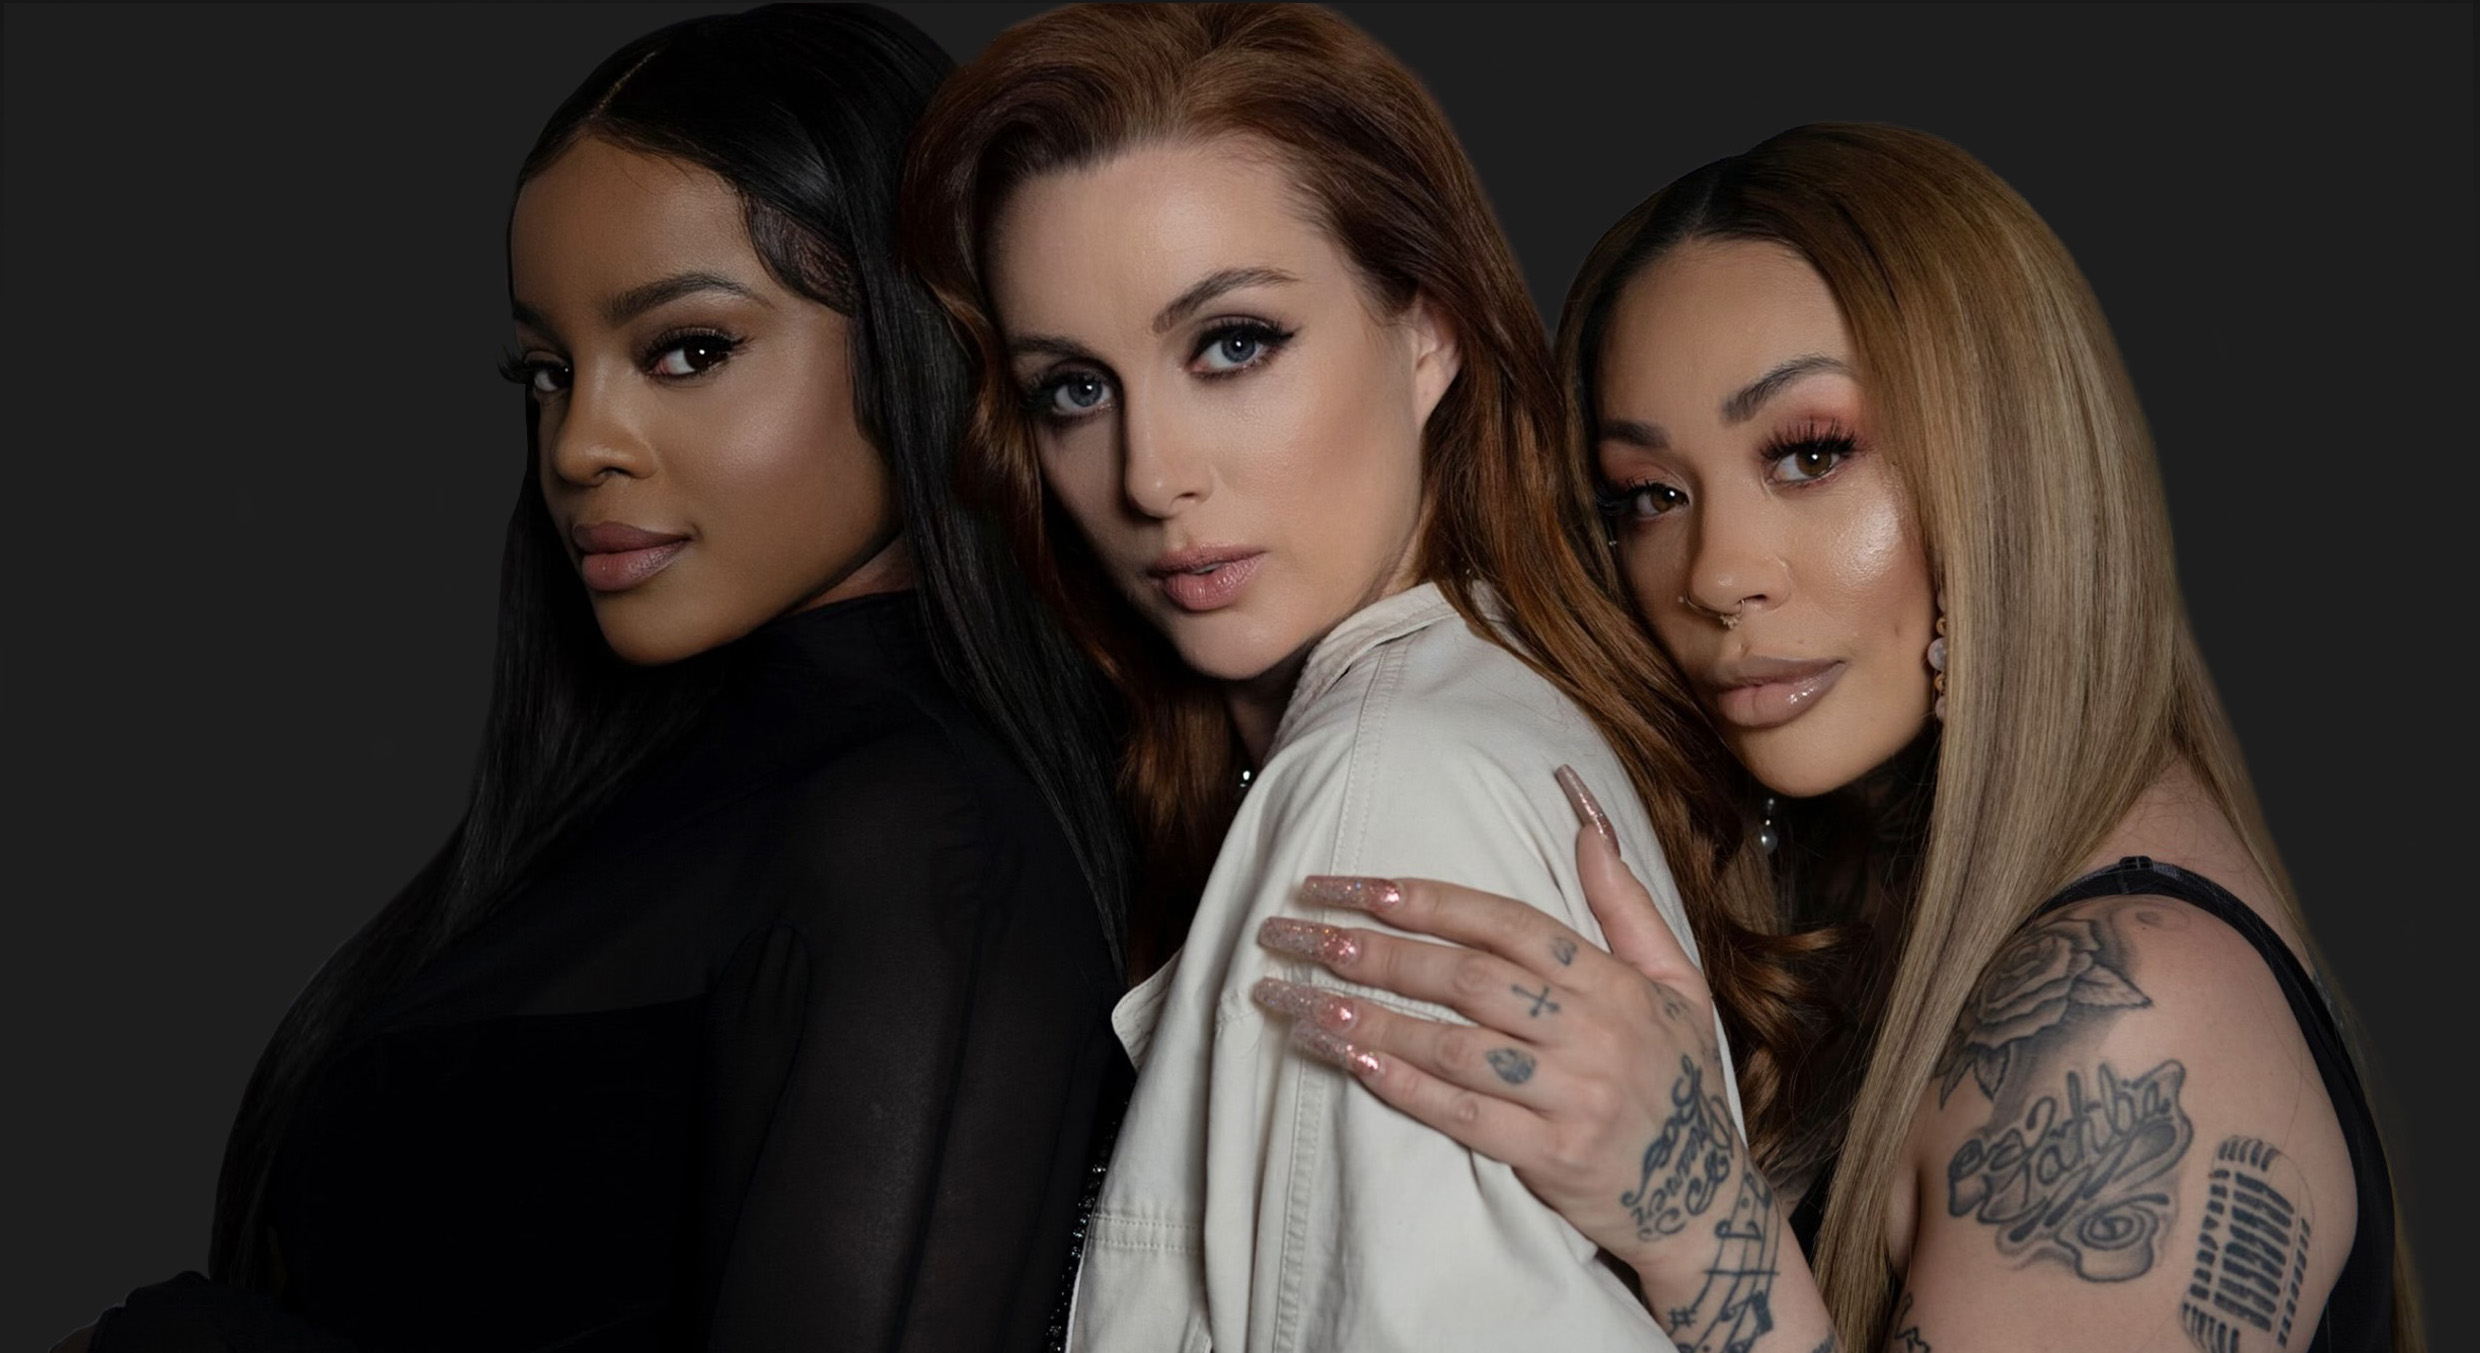 Sugababes Confirm New Album: “It’s in the Finishing Stages”